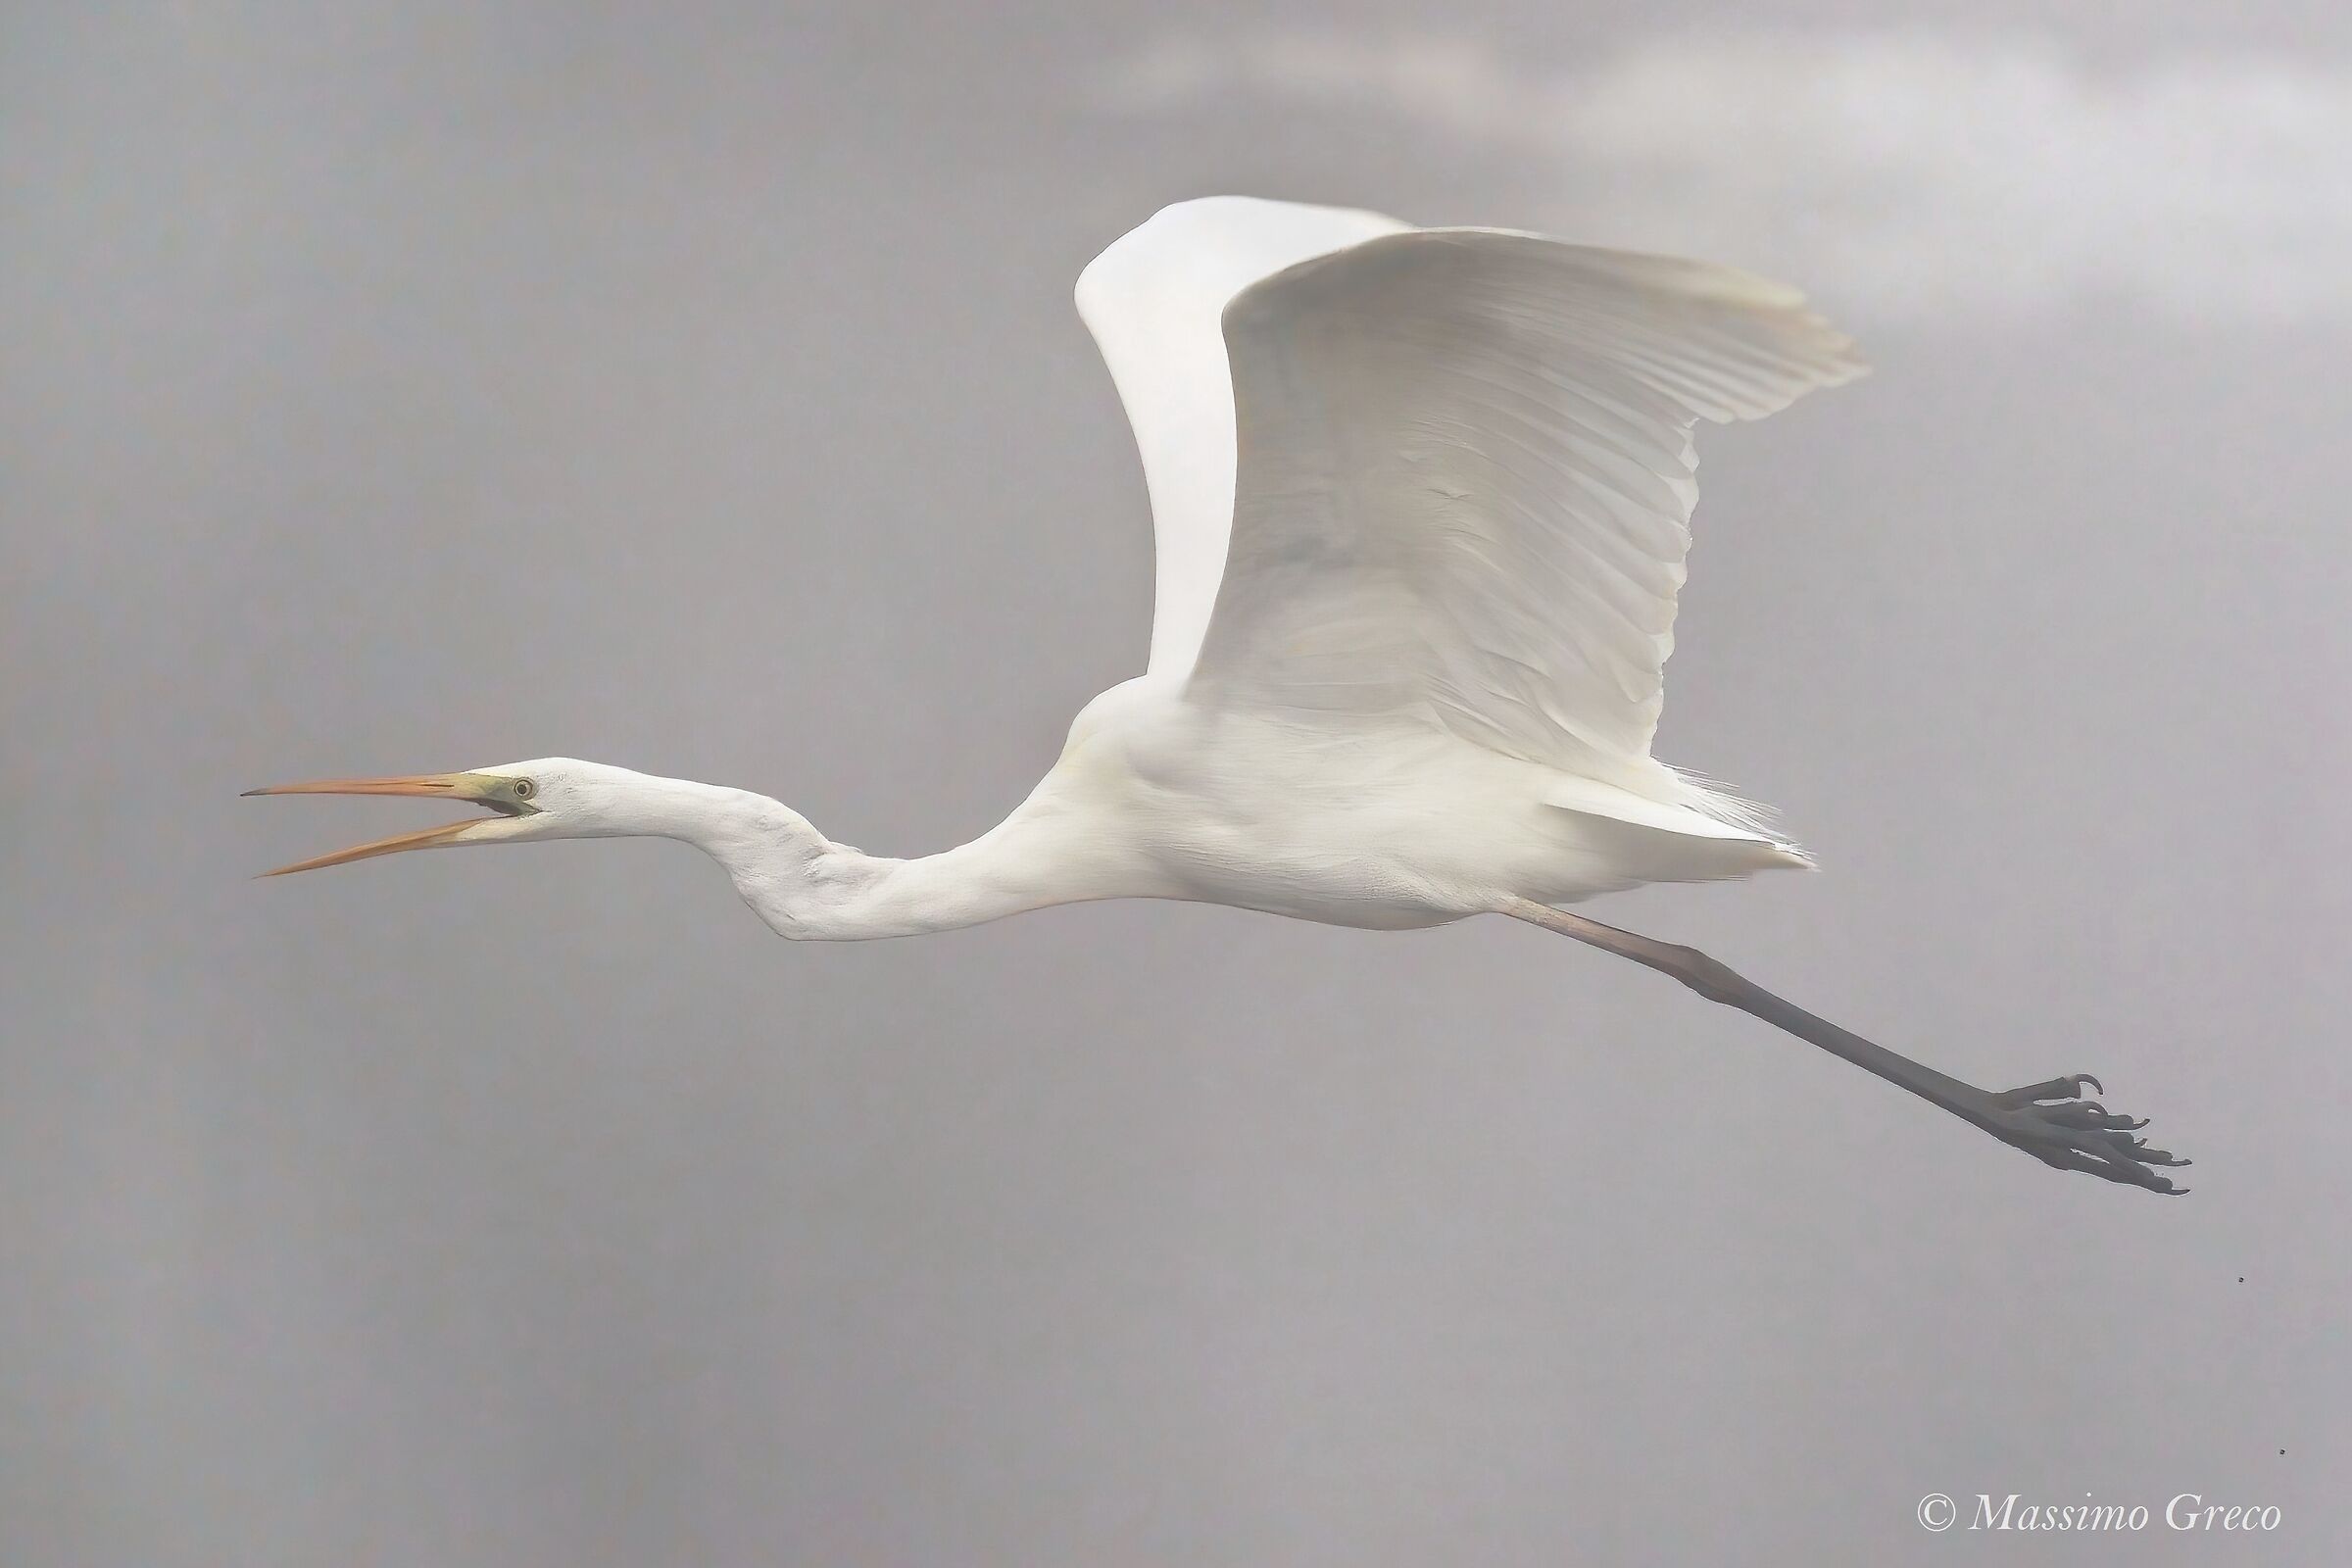 A Ghost in the Mist - Major White Heron...